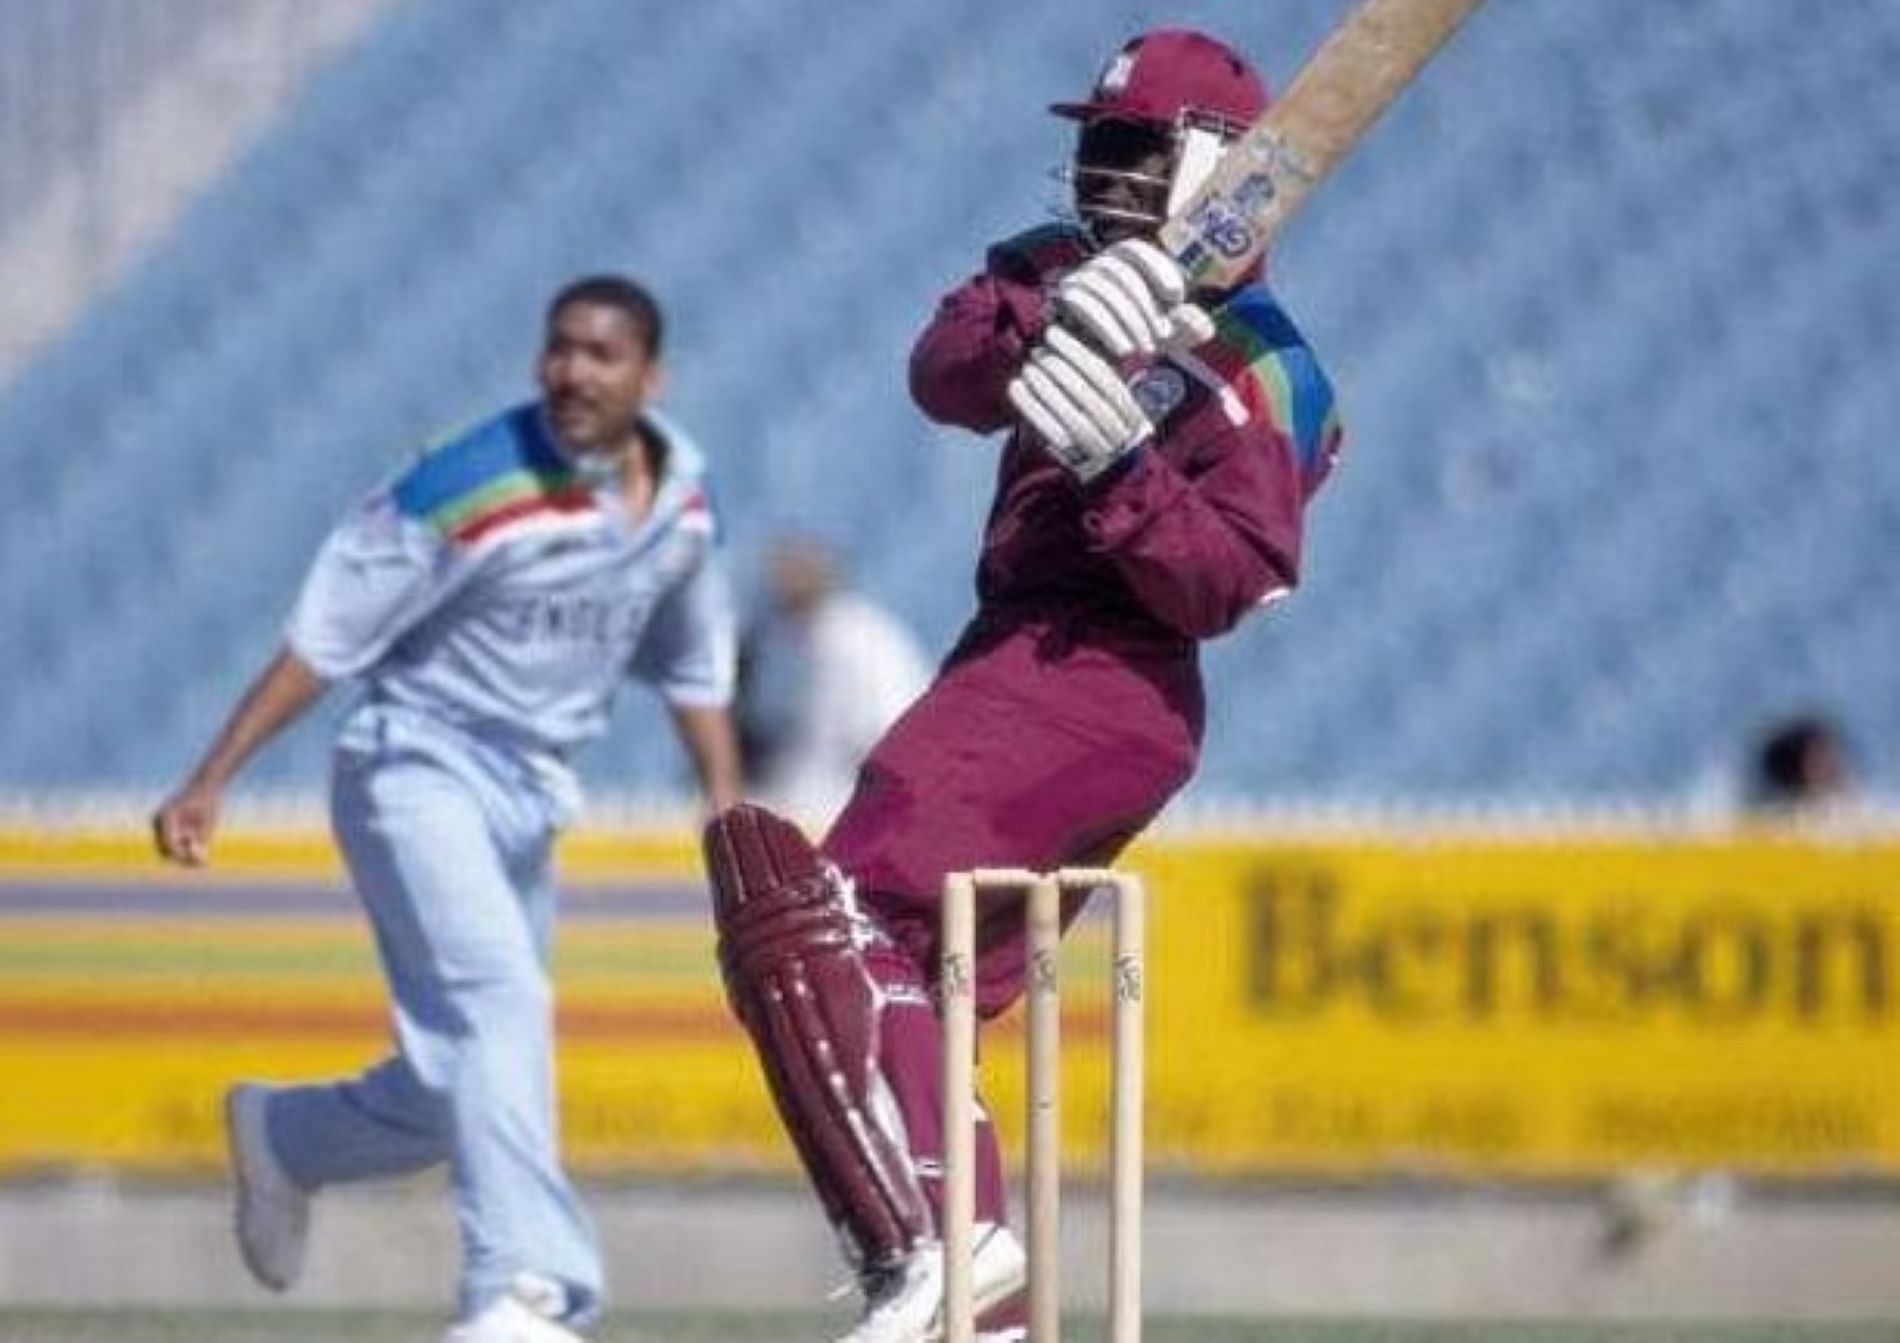 Desmond Haynes is one of the most accomplished opening batters in ODIs.